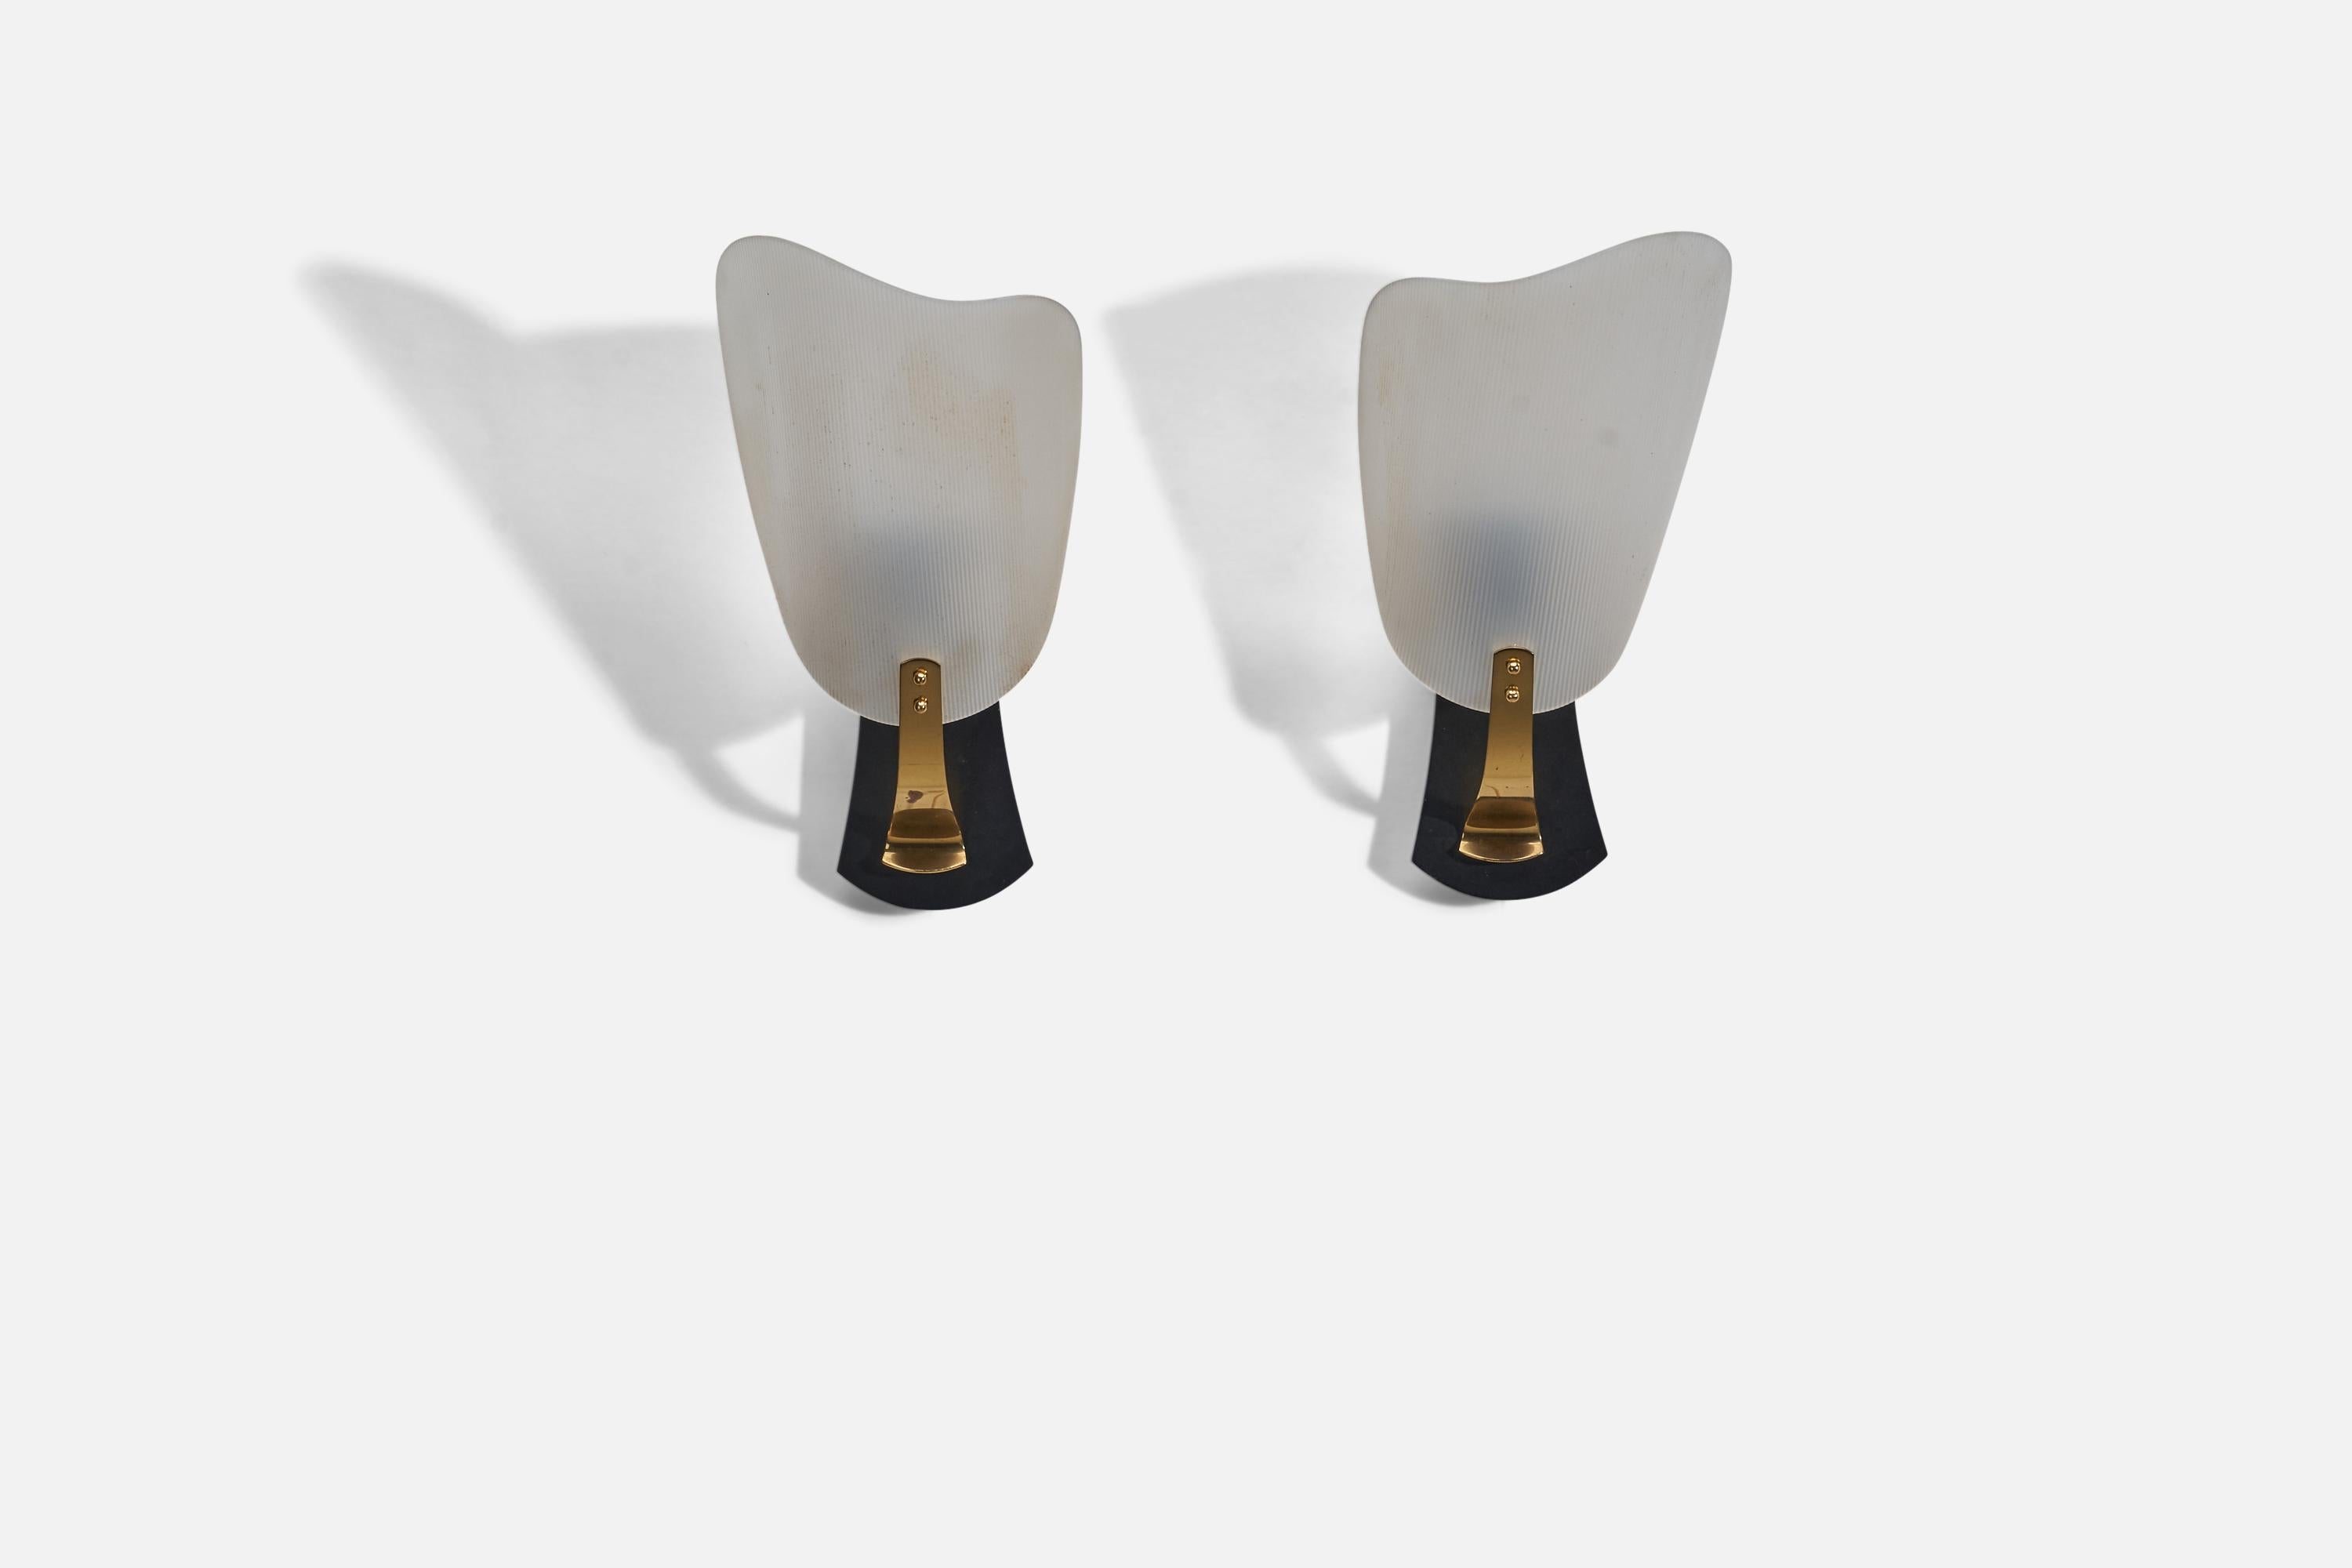 A pair of brass, acrylic and black lacquered metal sconces designed and produced by Stilnovo, Italy, 1960s.

Dimensions of Back Plate (inches) : 5.12 x 3.18 x 0.64 (Height x Width x Depth)

Sockets take standard E-26 medium base bulbs.

There